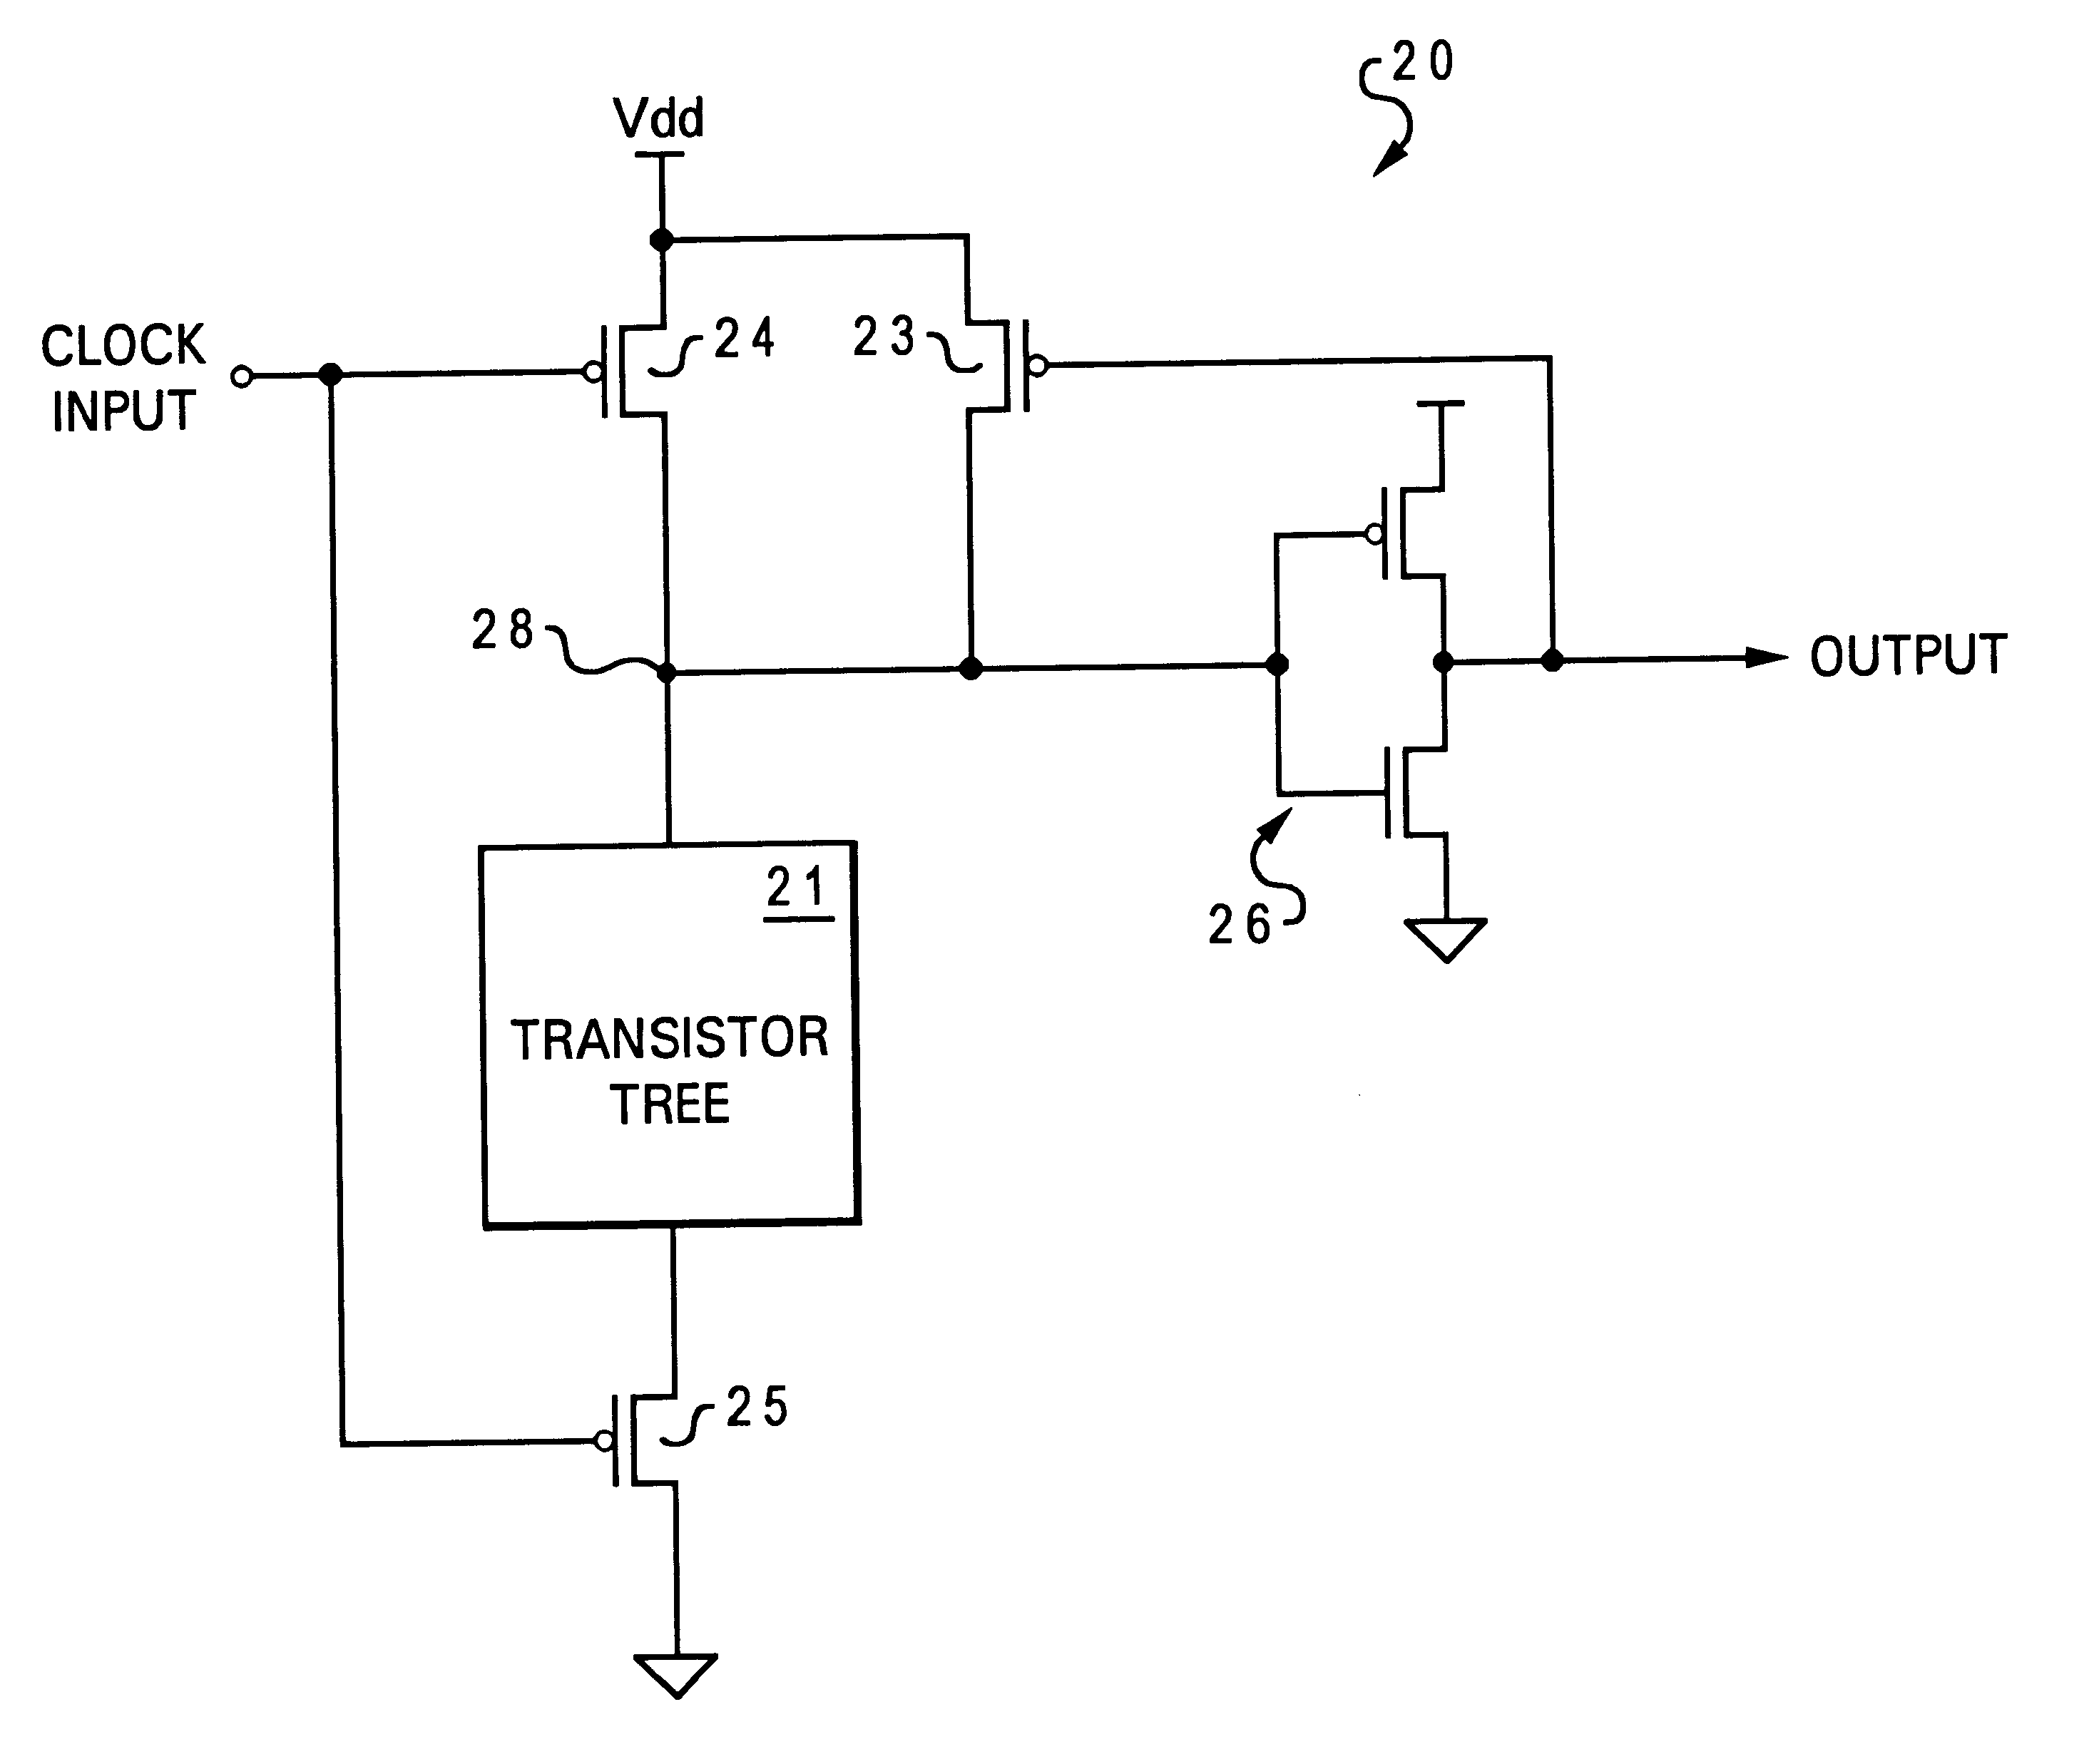 Domino logic circuit having multiplicity of gate dielectric thicknesses